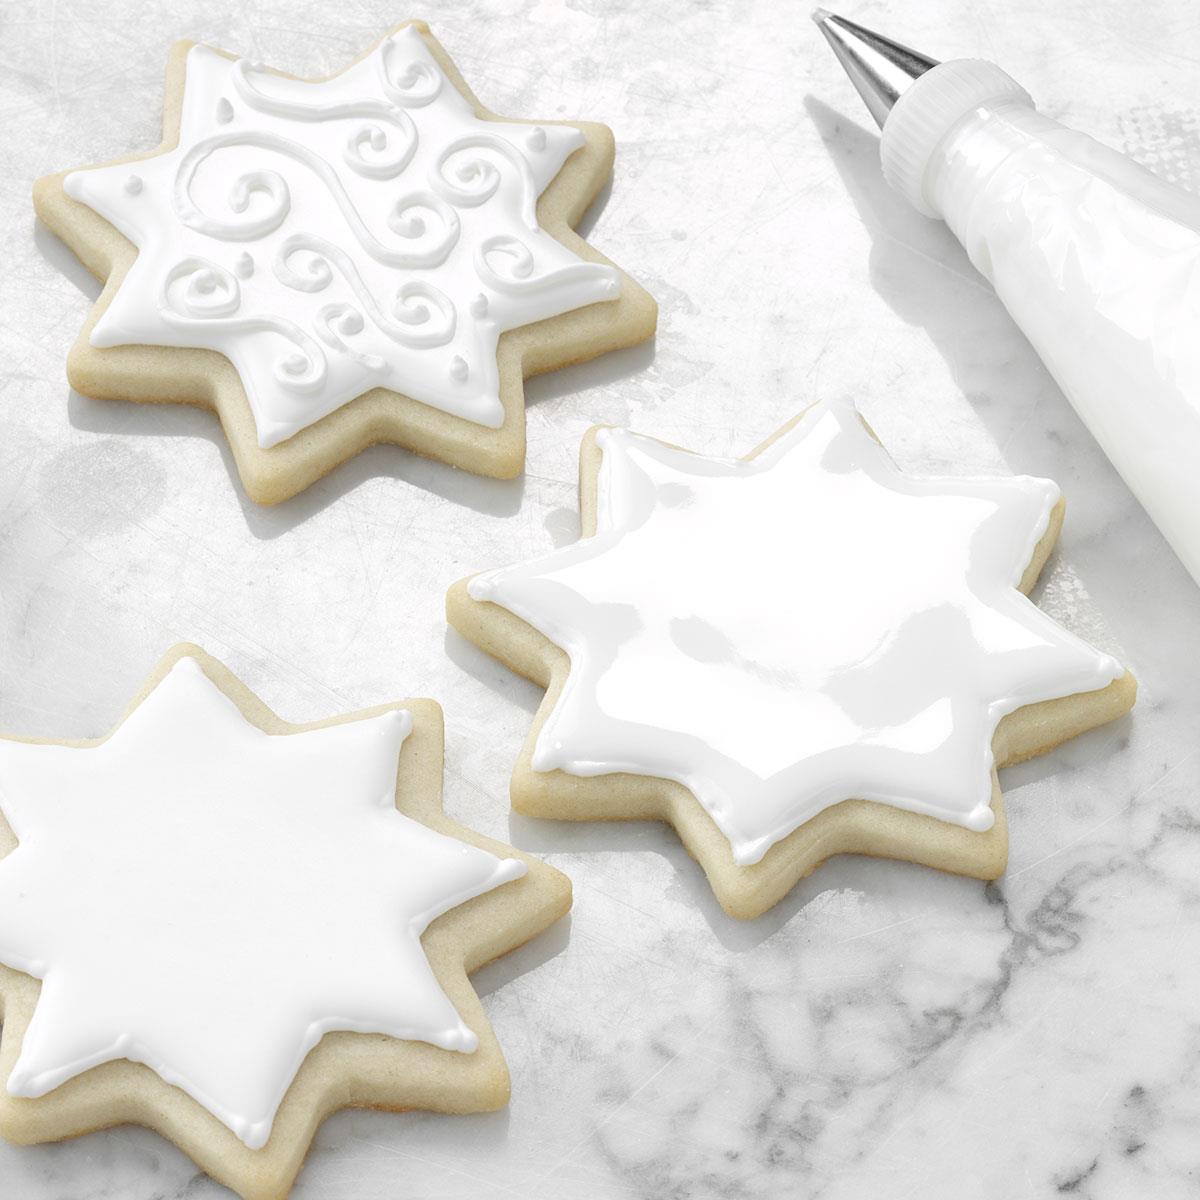 Royal Icing Recipe Taste Of Home